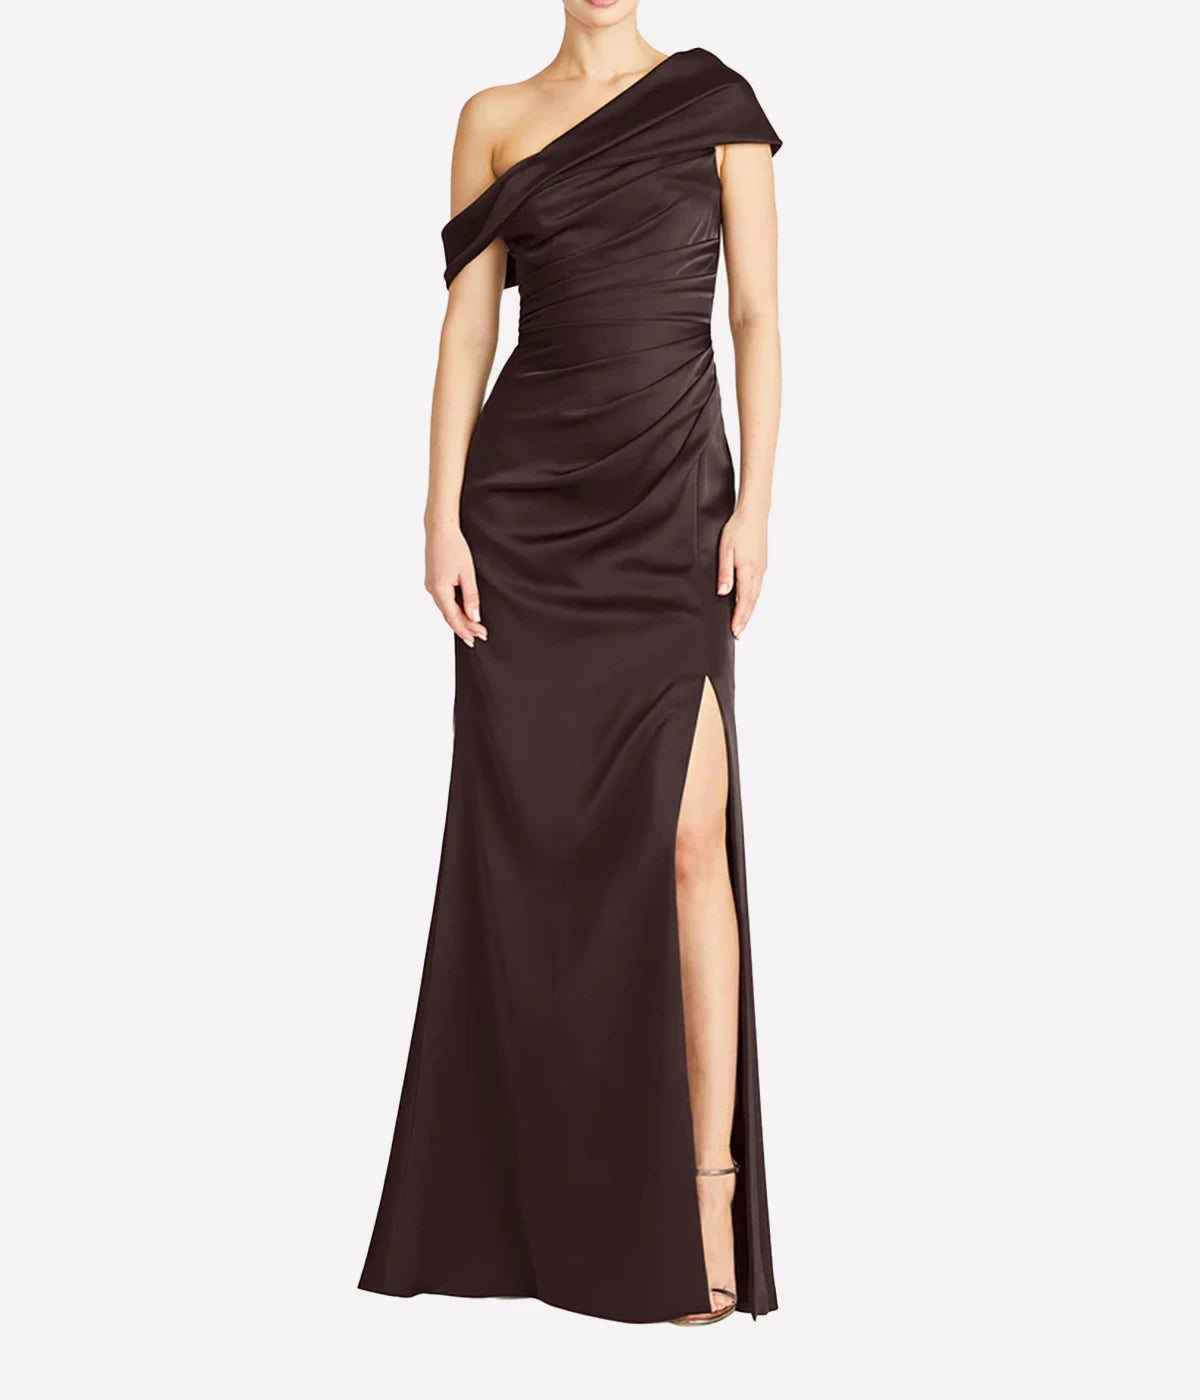 Celia One Shoulder Draped Gown in Chocolate